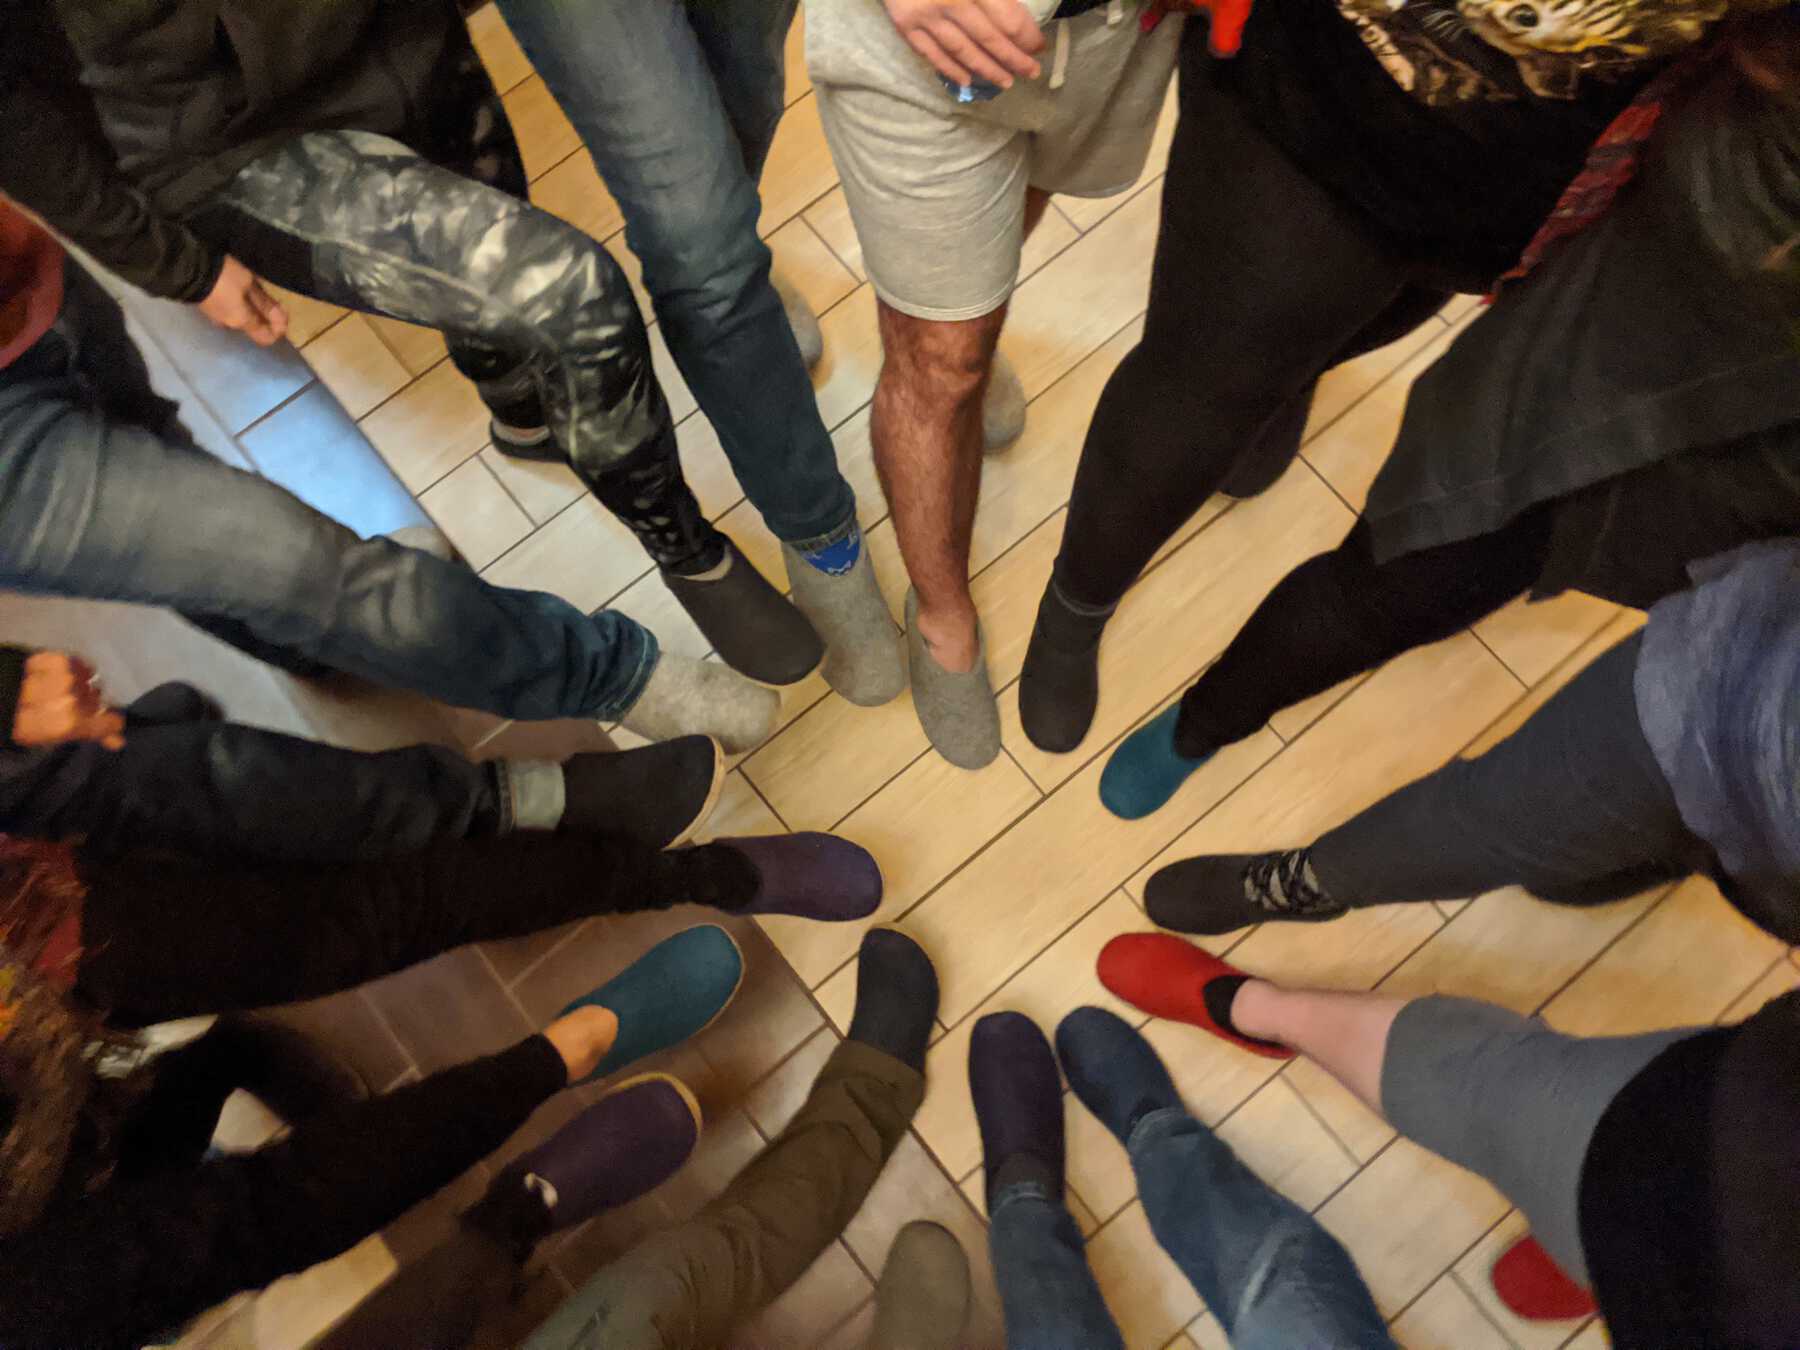 Circle of people's feet wearing slippers